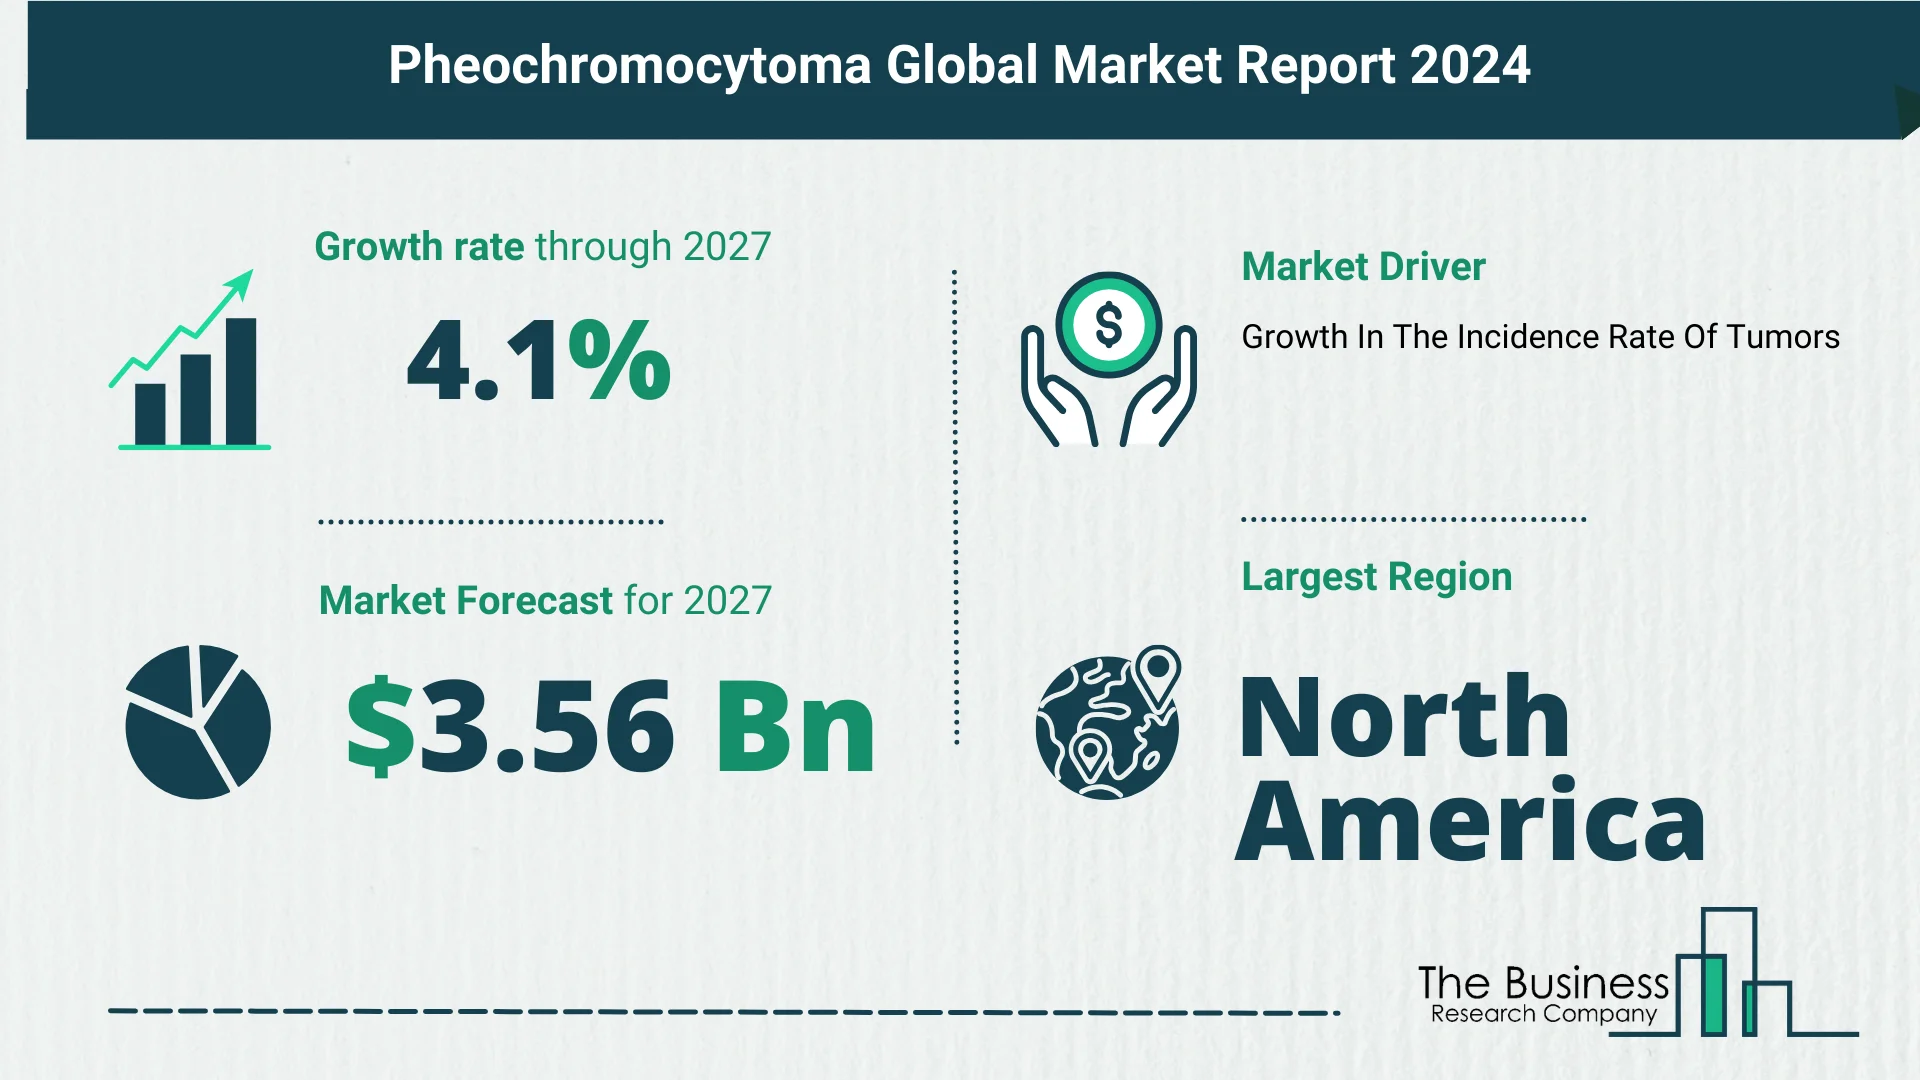 What Is The Forecast Growth Rate For The Pheochromocytoma Market?